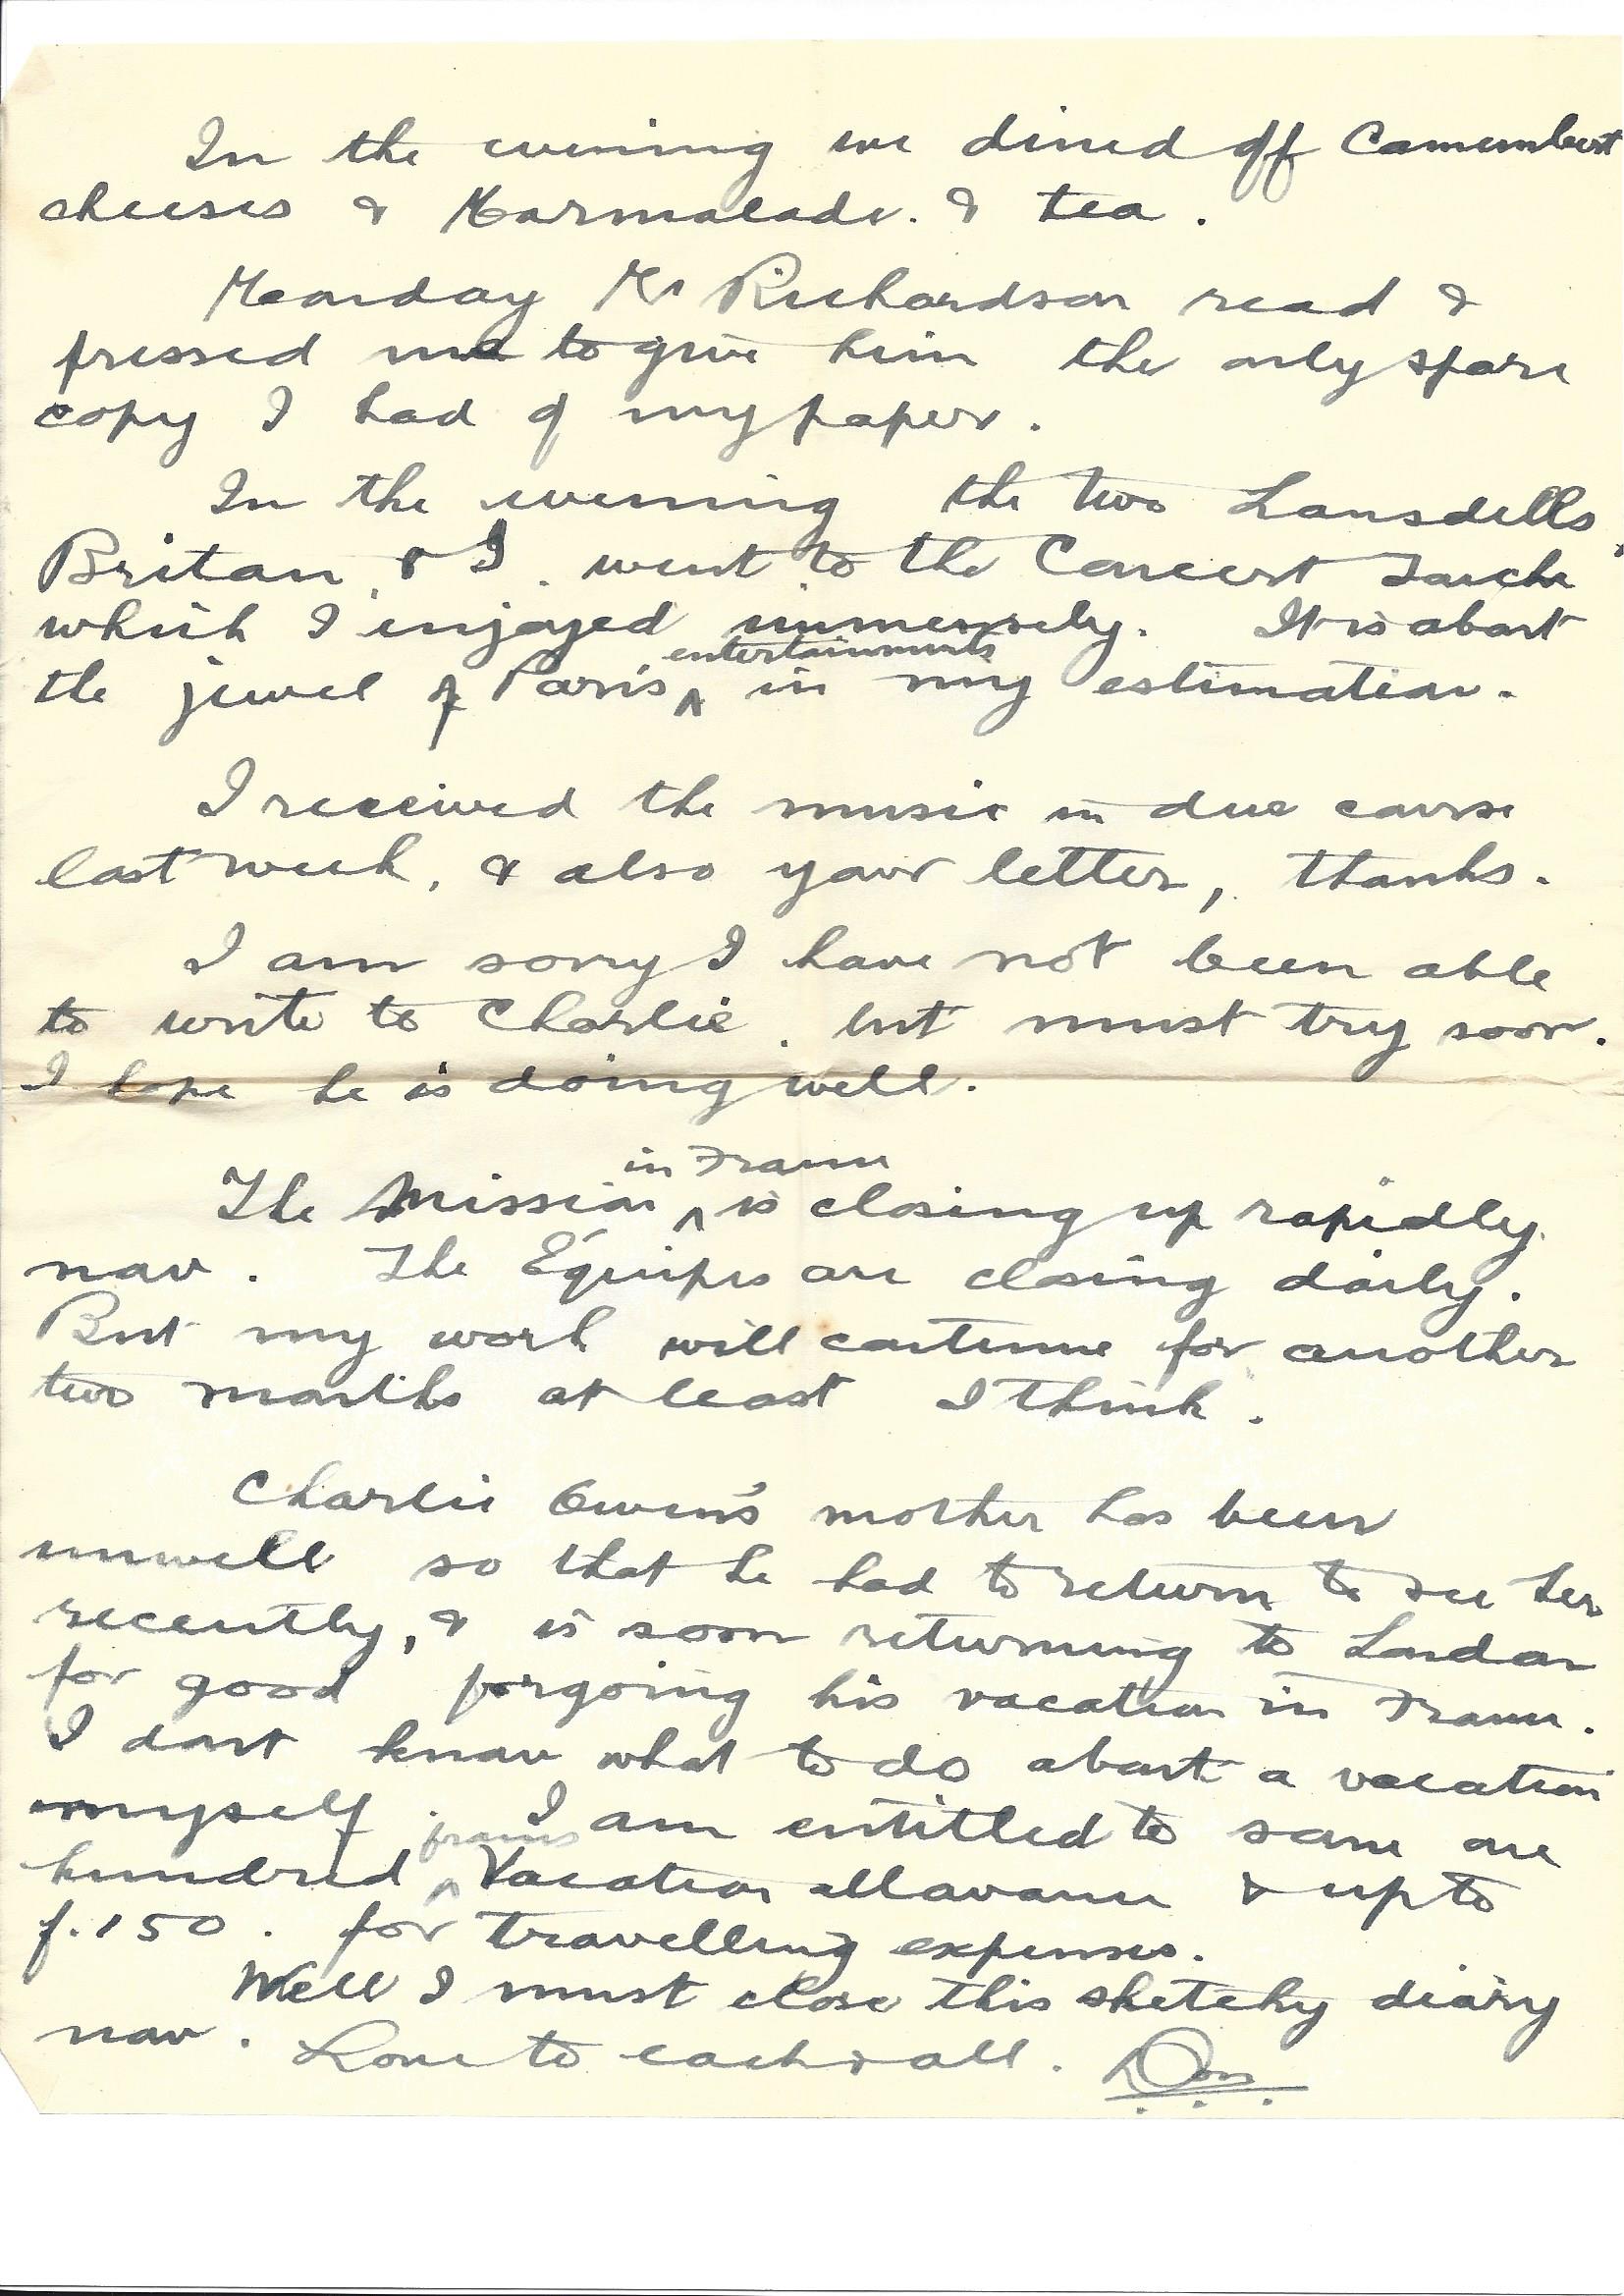 1920-02-17 page 4 letter by Donald Bearman